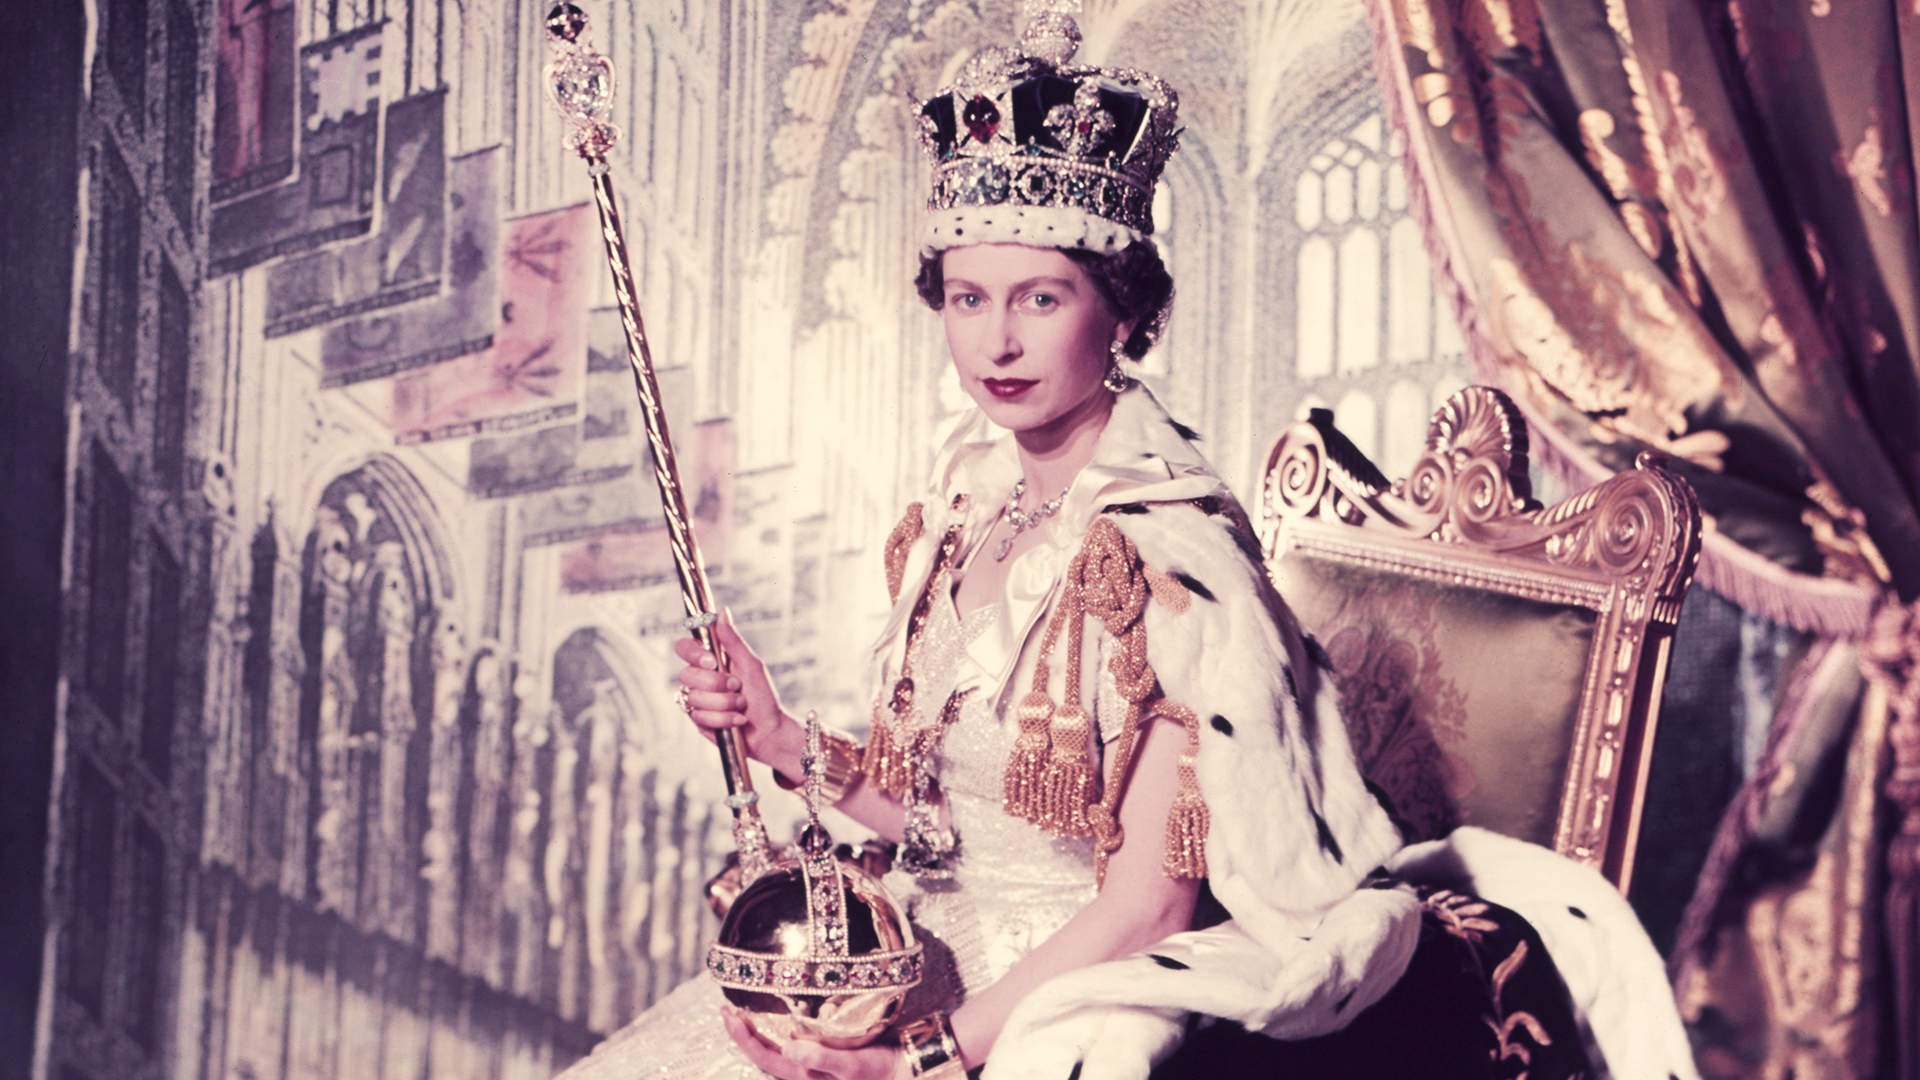 June 2, 1953: Queen Elizabeth II Was Crowned the Monarch of the United Kingdom